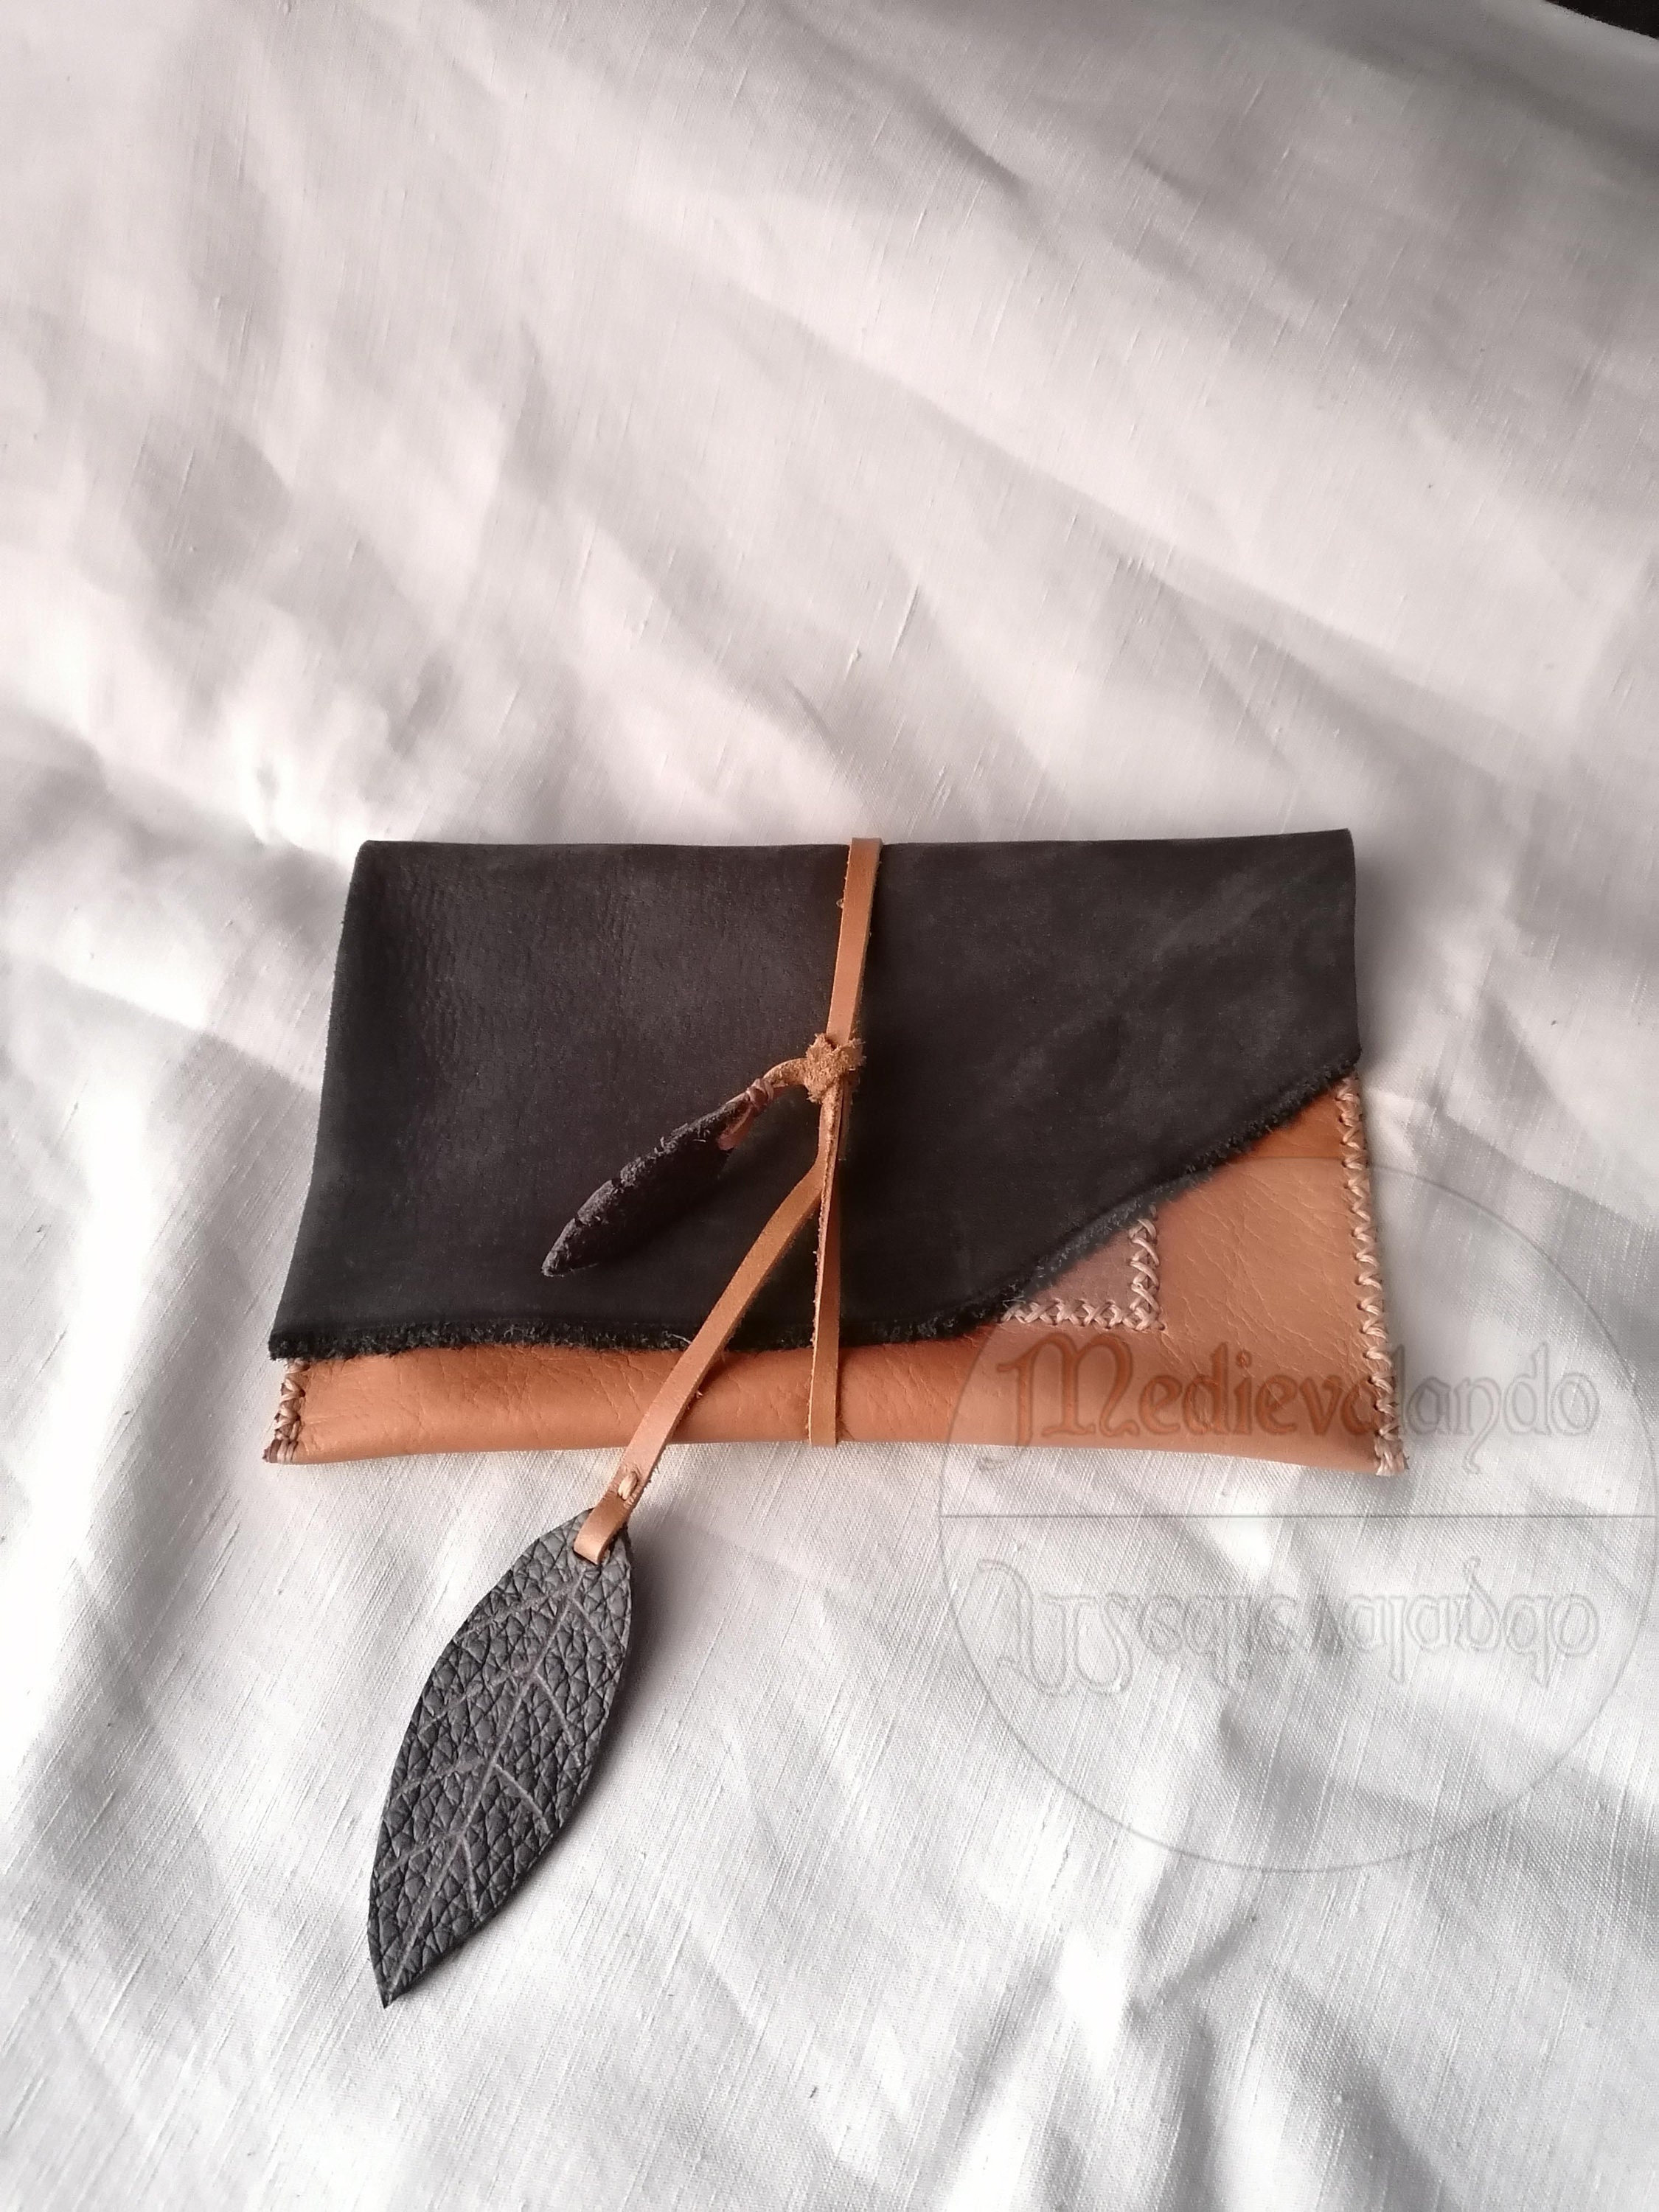 My Vintage Tobacco Pouch by Art by MyChicC